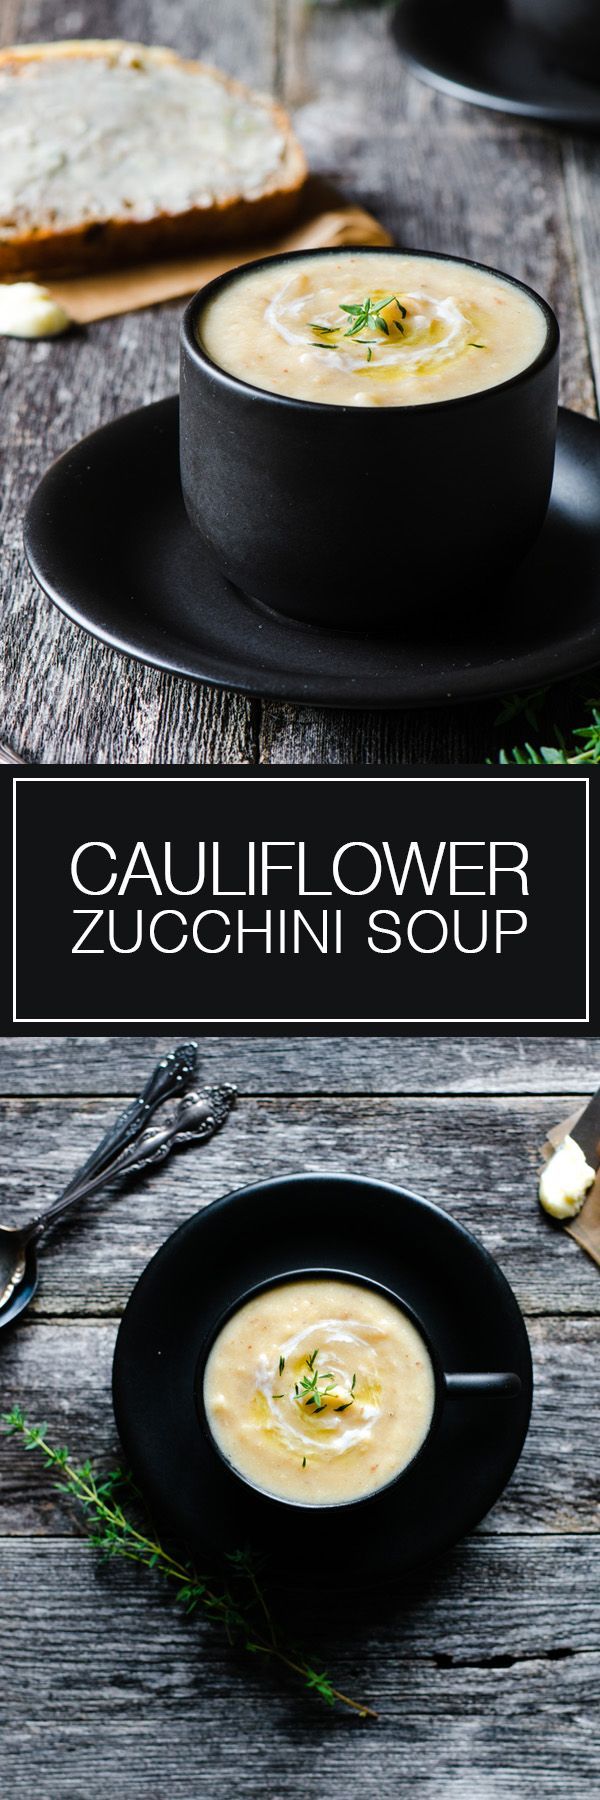 Cauliflower Zucchini Soup – Healthy  soup with lots of veggies!